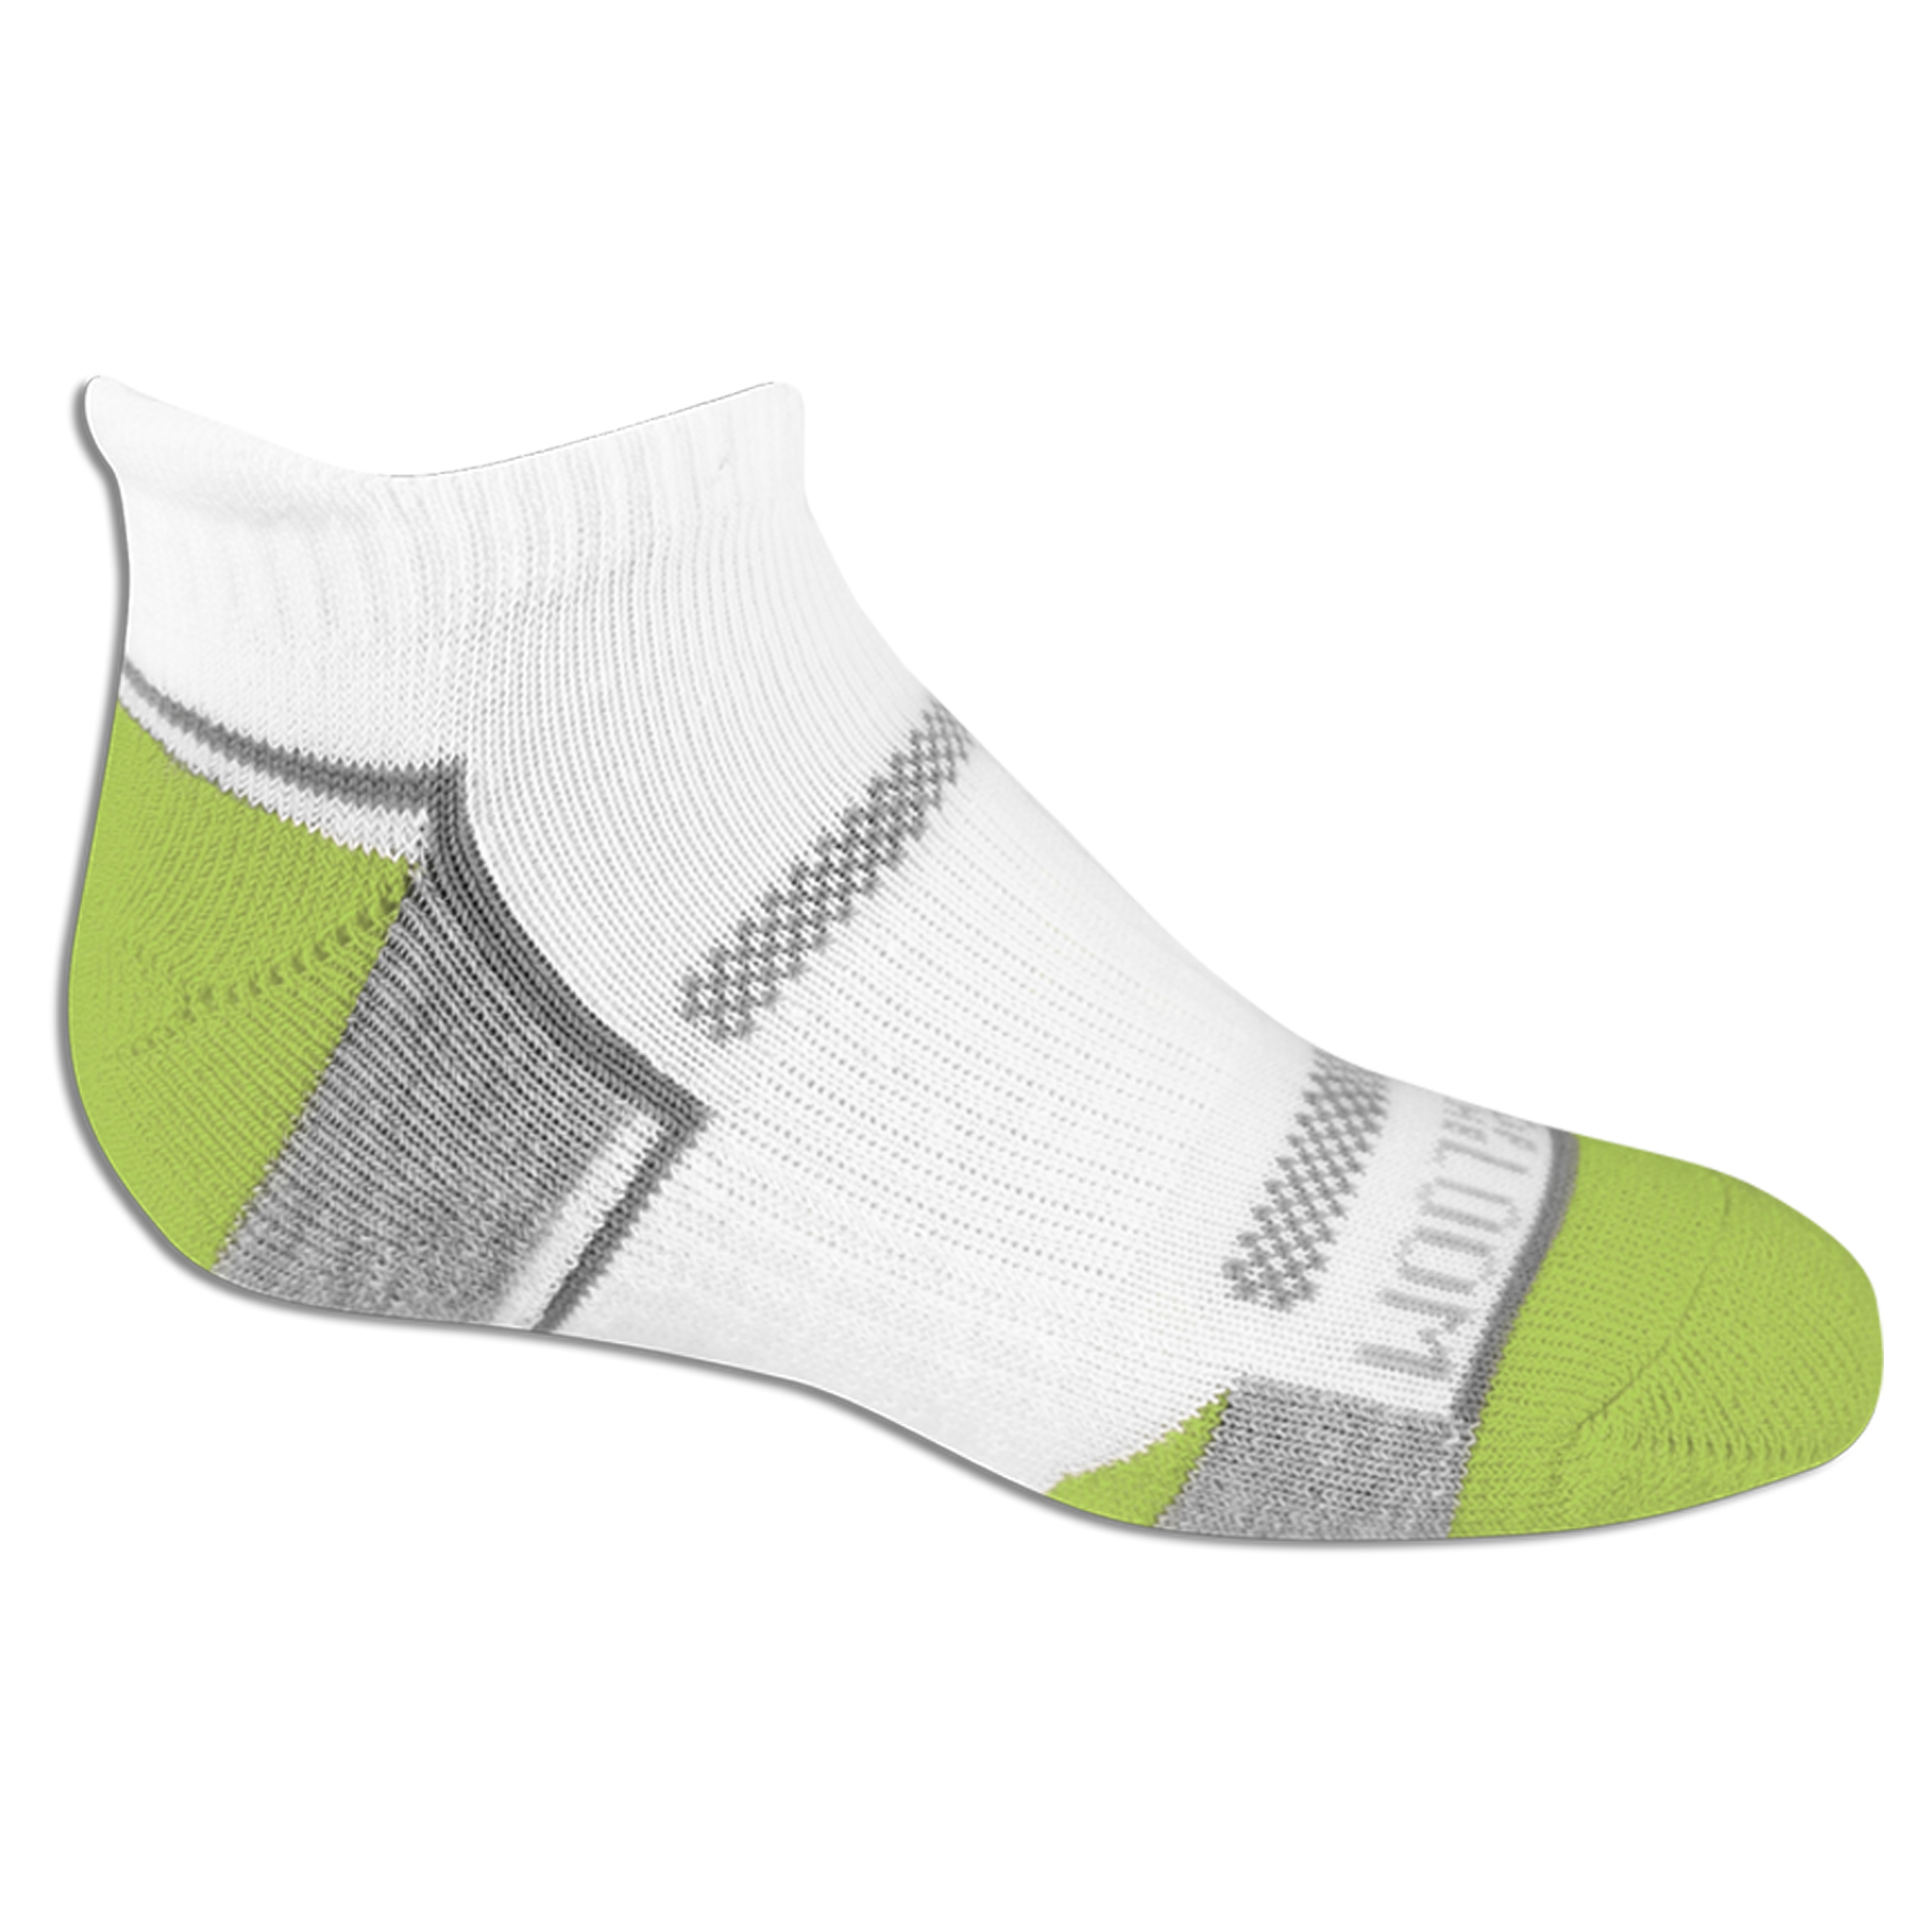 Fruit of the Loom Boys Socks, 6 Pack Low Cut Active Everyday Cushioned (Little Boys & Big Boys) - image 2 of 3